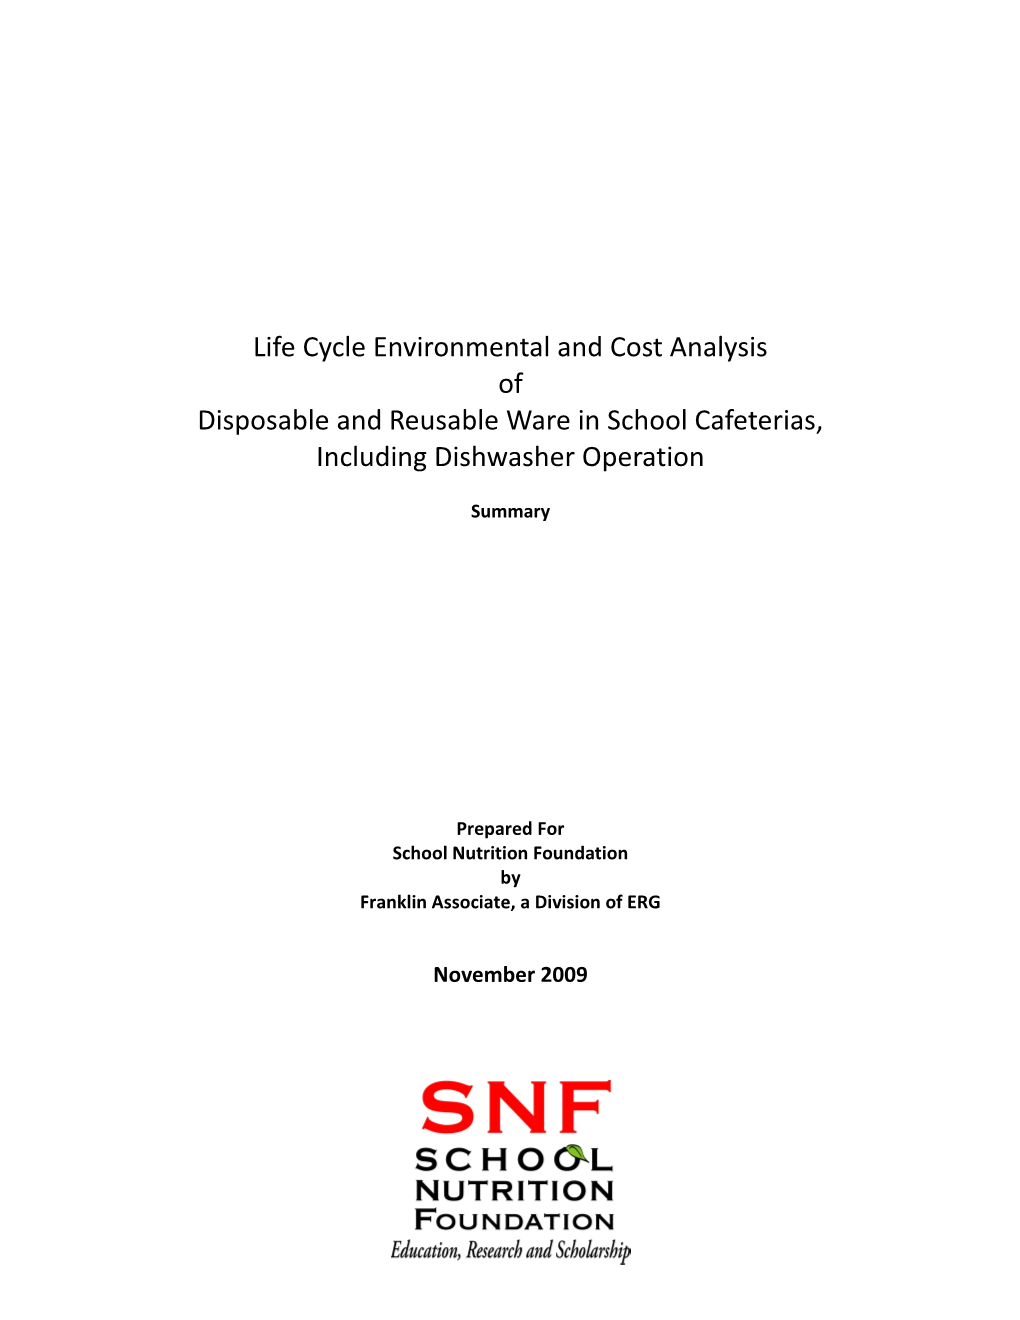 Life Cycle Environmental and Cost Analysis of Disposable and Reusable Ware in School Cafeterias, Including Dishwasher Operation